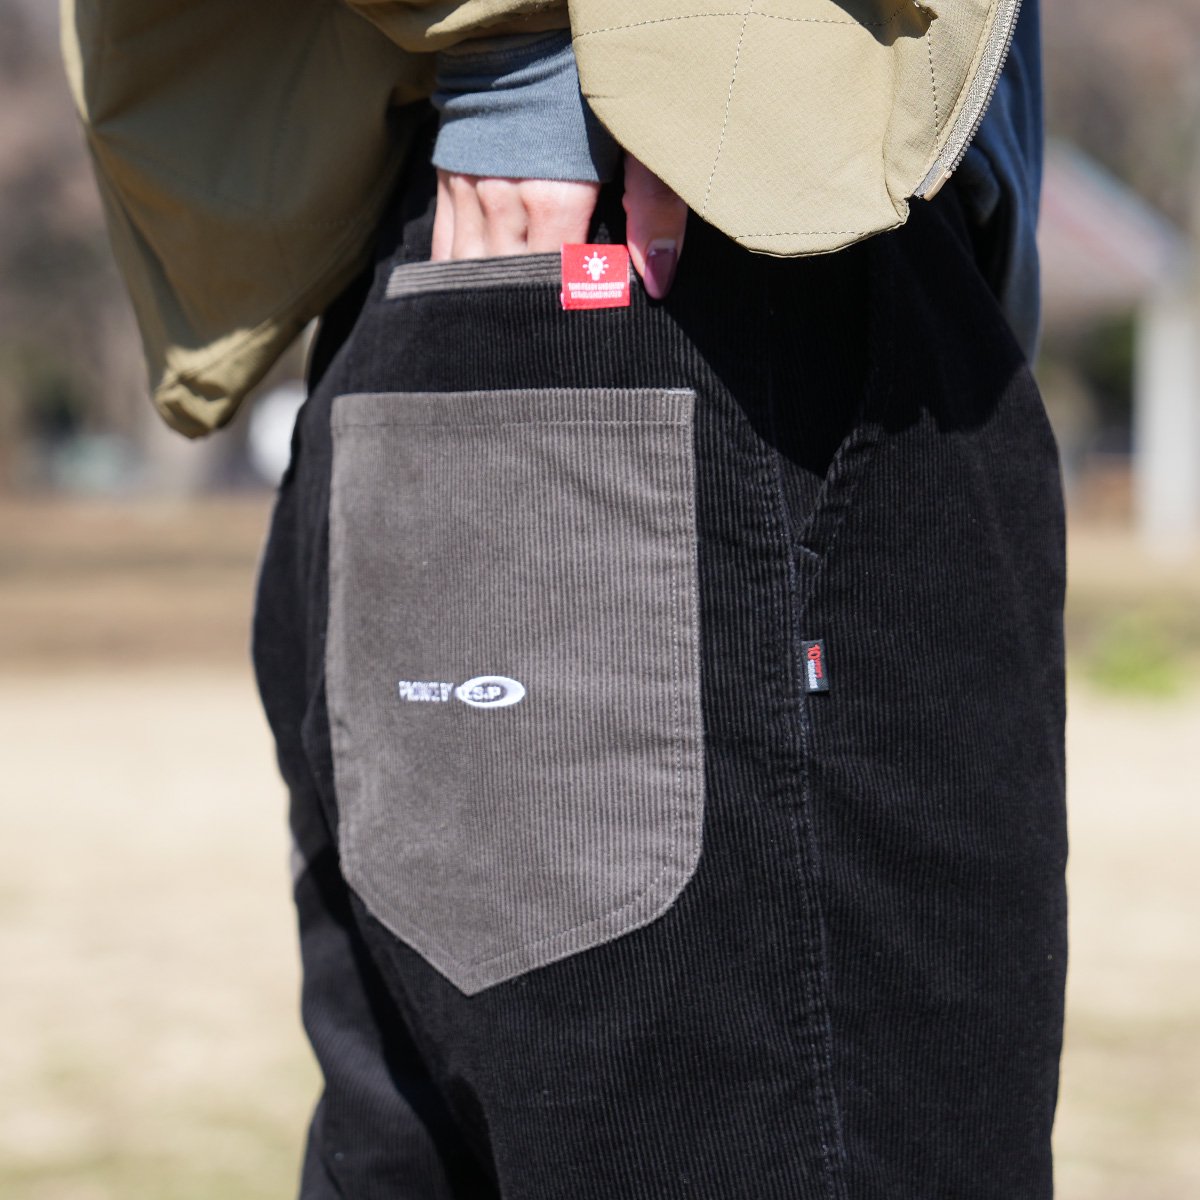 <img class='new_mark_img1' src='https://img.shop-pro.jp/img/new/icons63.gif' style='border:none;display:inline;margin:0px;padding:0px;width:auto;' />3A corduroy ankle pants